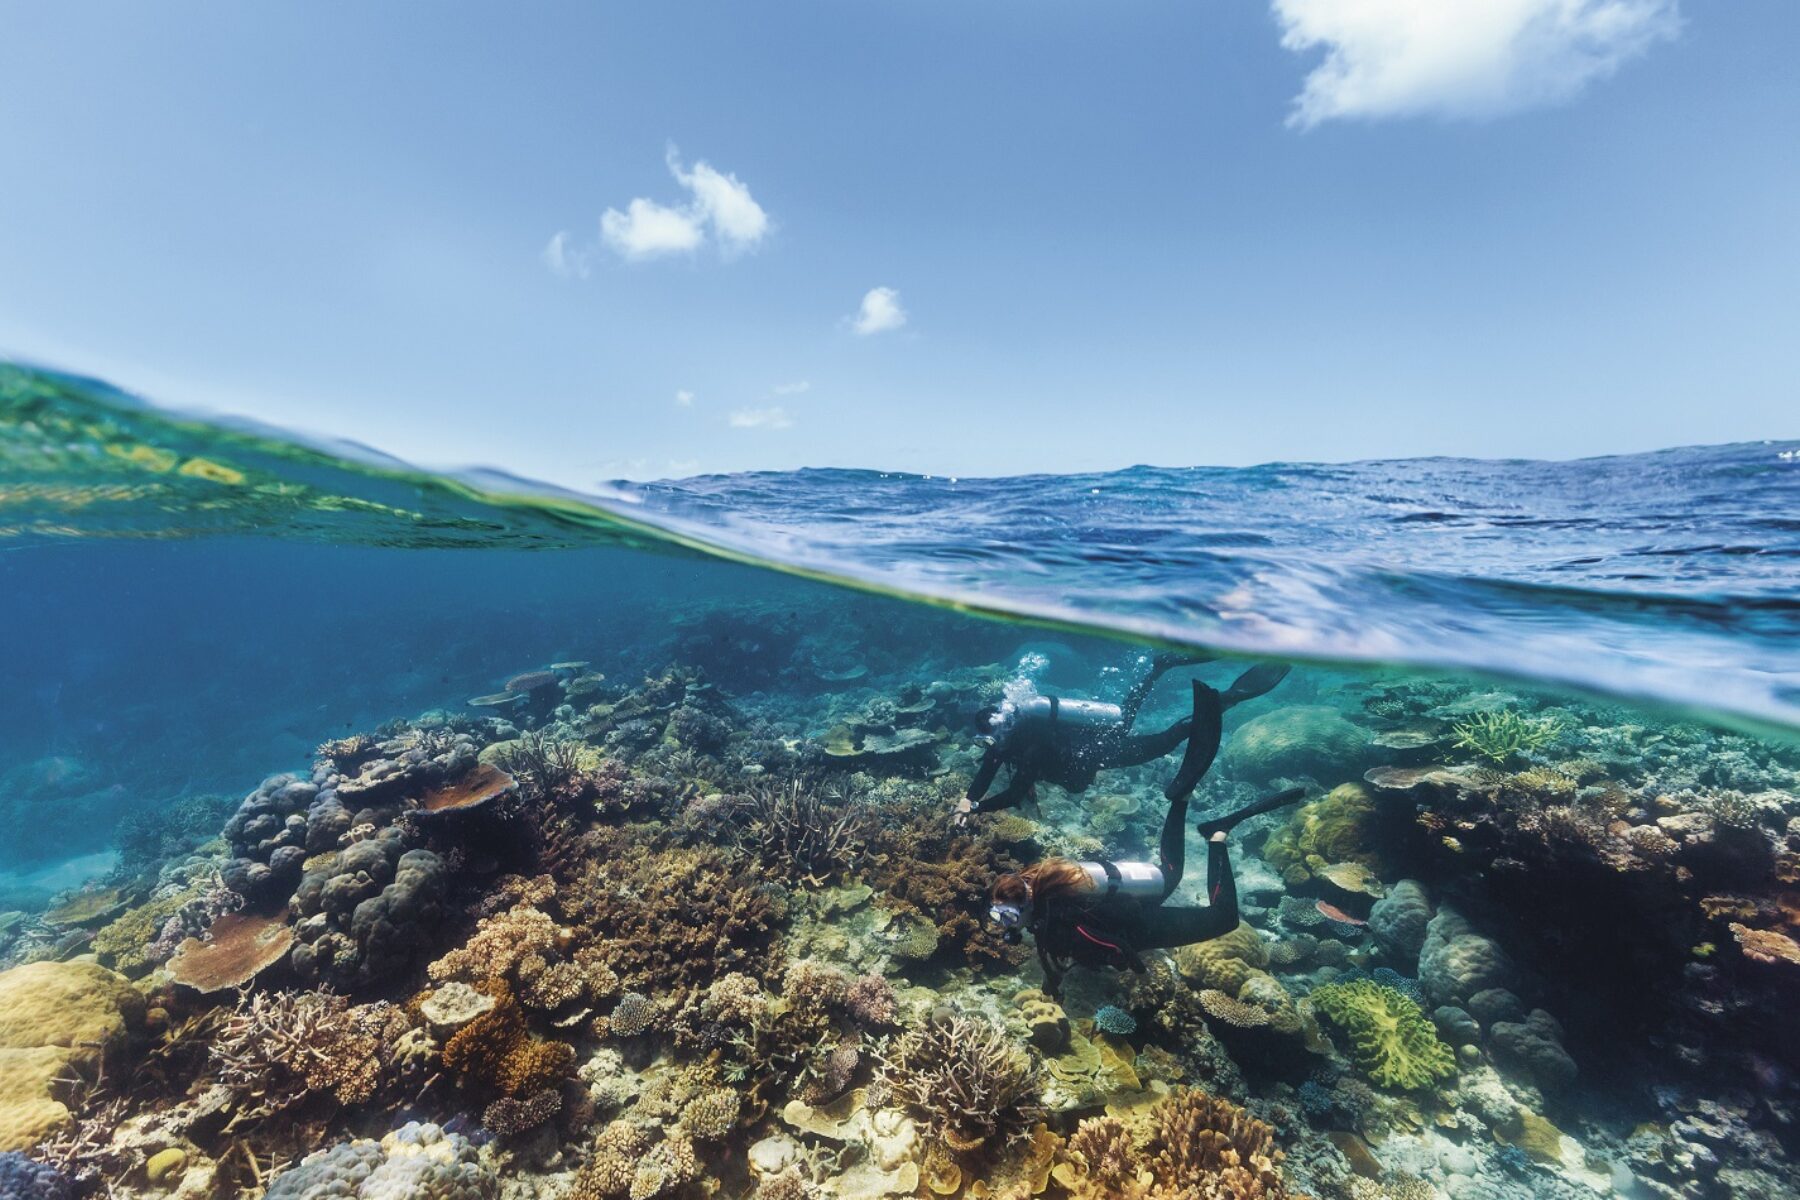 Find marine wildlife in Port Douglas at the Great Barrier Reef